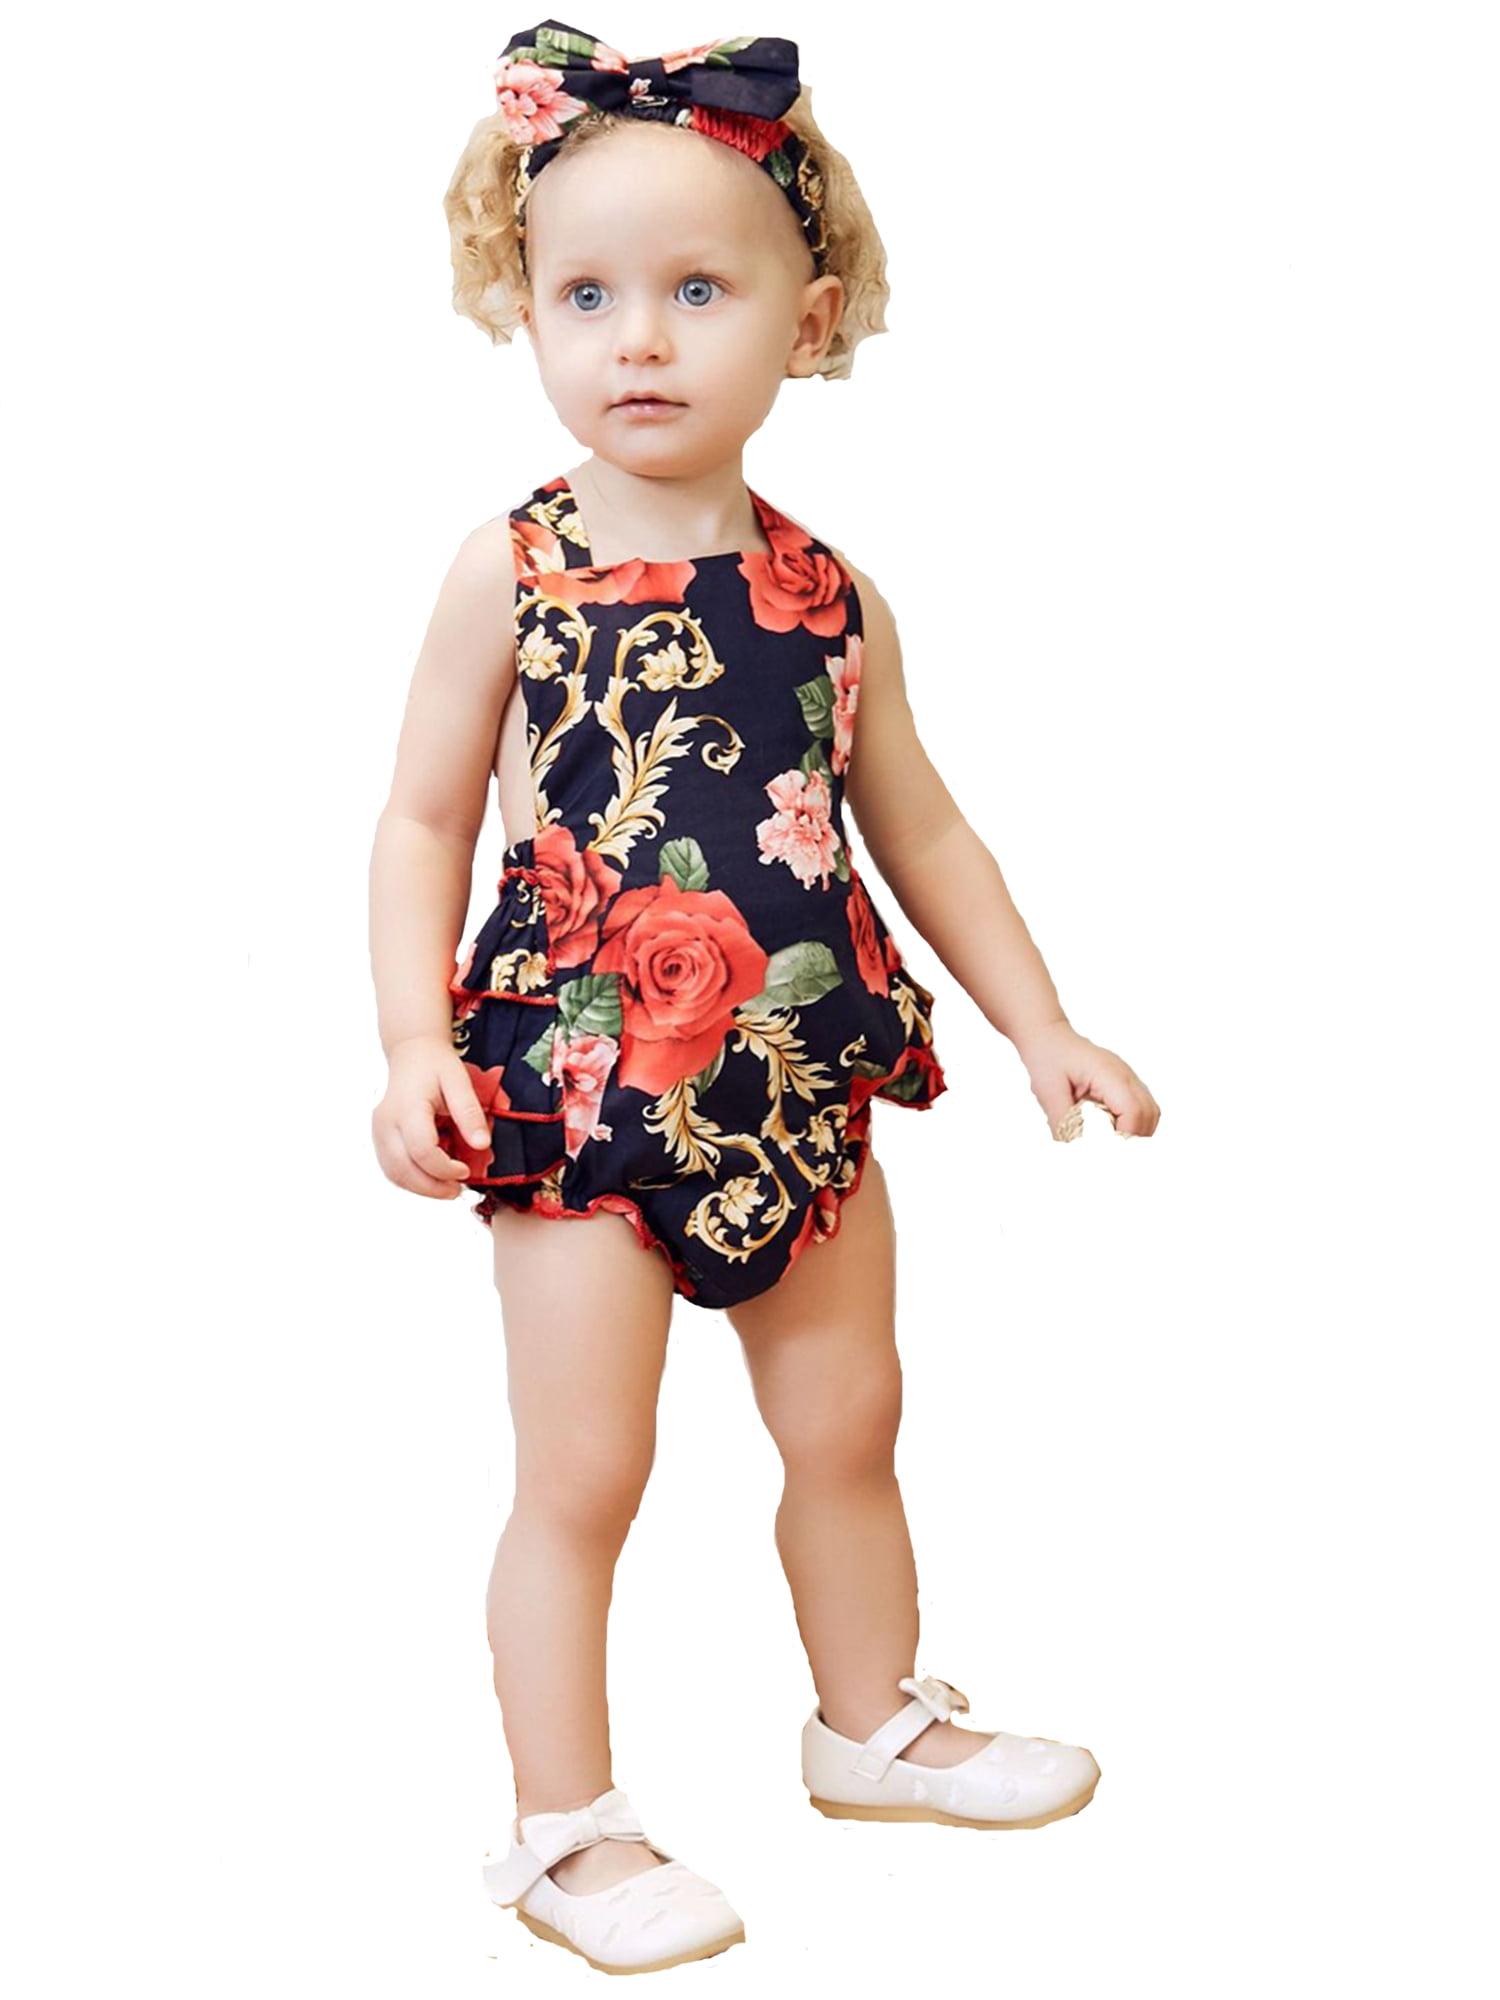 New Infant Kids Baby Girl Floral Bodysuit Romper Jumpsuit Outfit Summer Clothes 